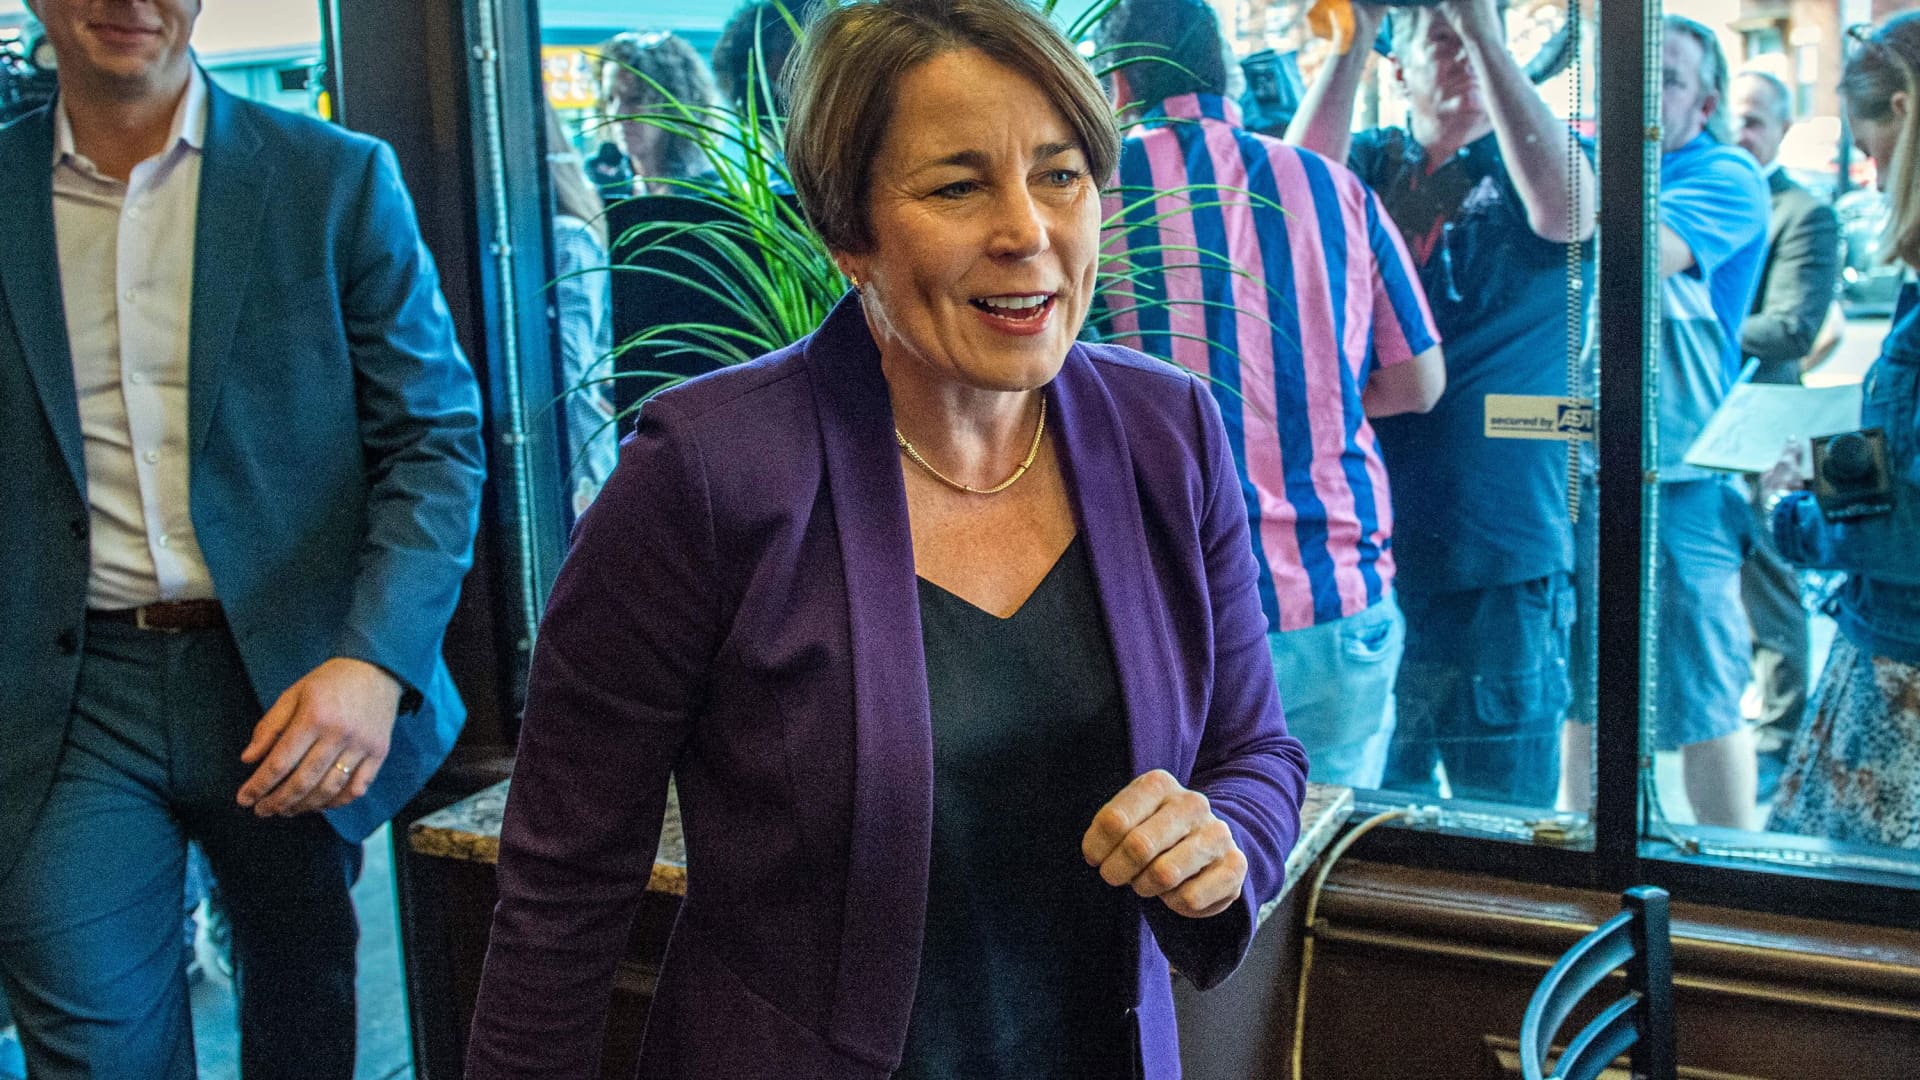 Democrat Gubernatorial nominee Maura Healey (R) visits Meridian Street Market as she campaigns on the eve of the US midterm elections, in Boston, Massachusetts, on November 7, 2022.